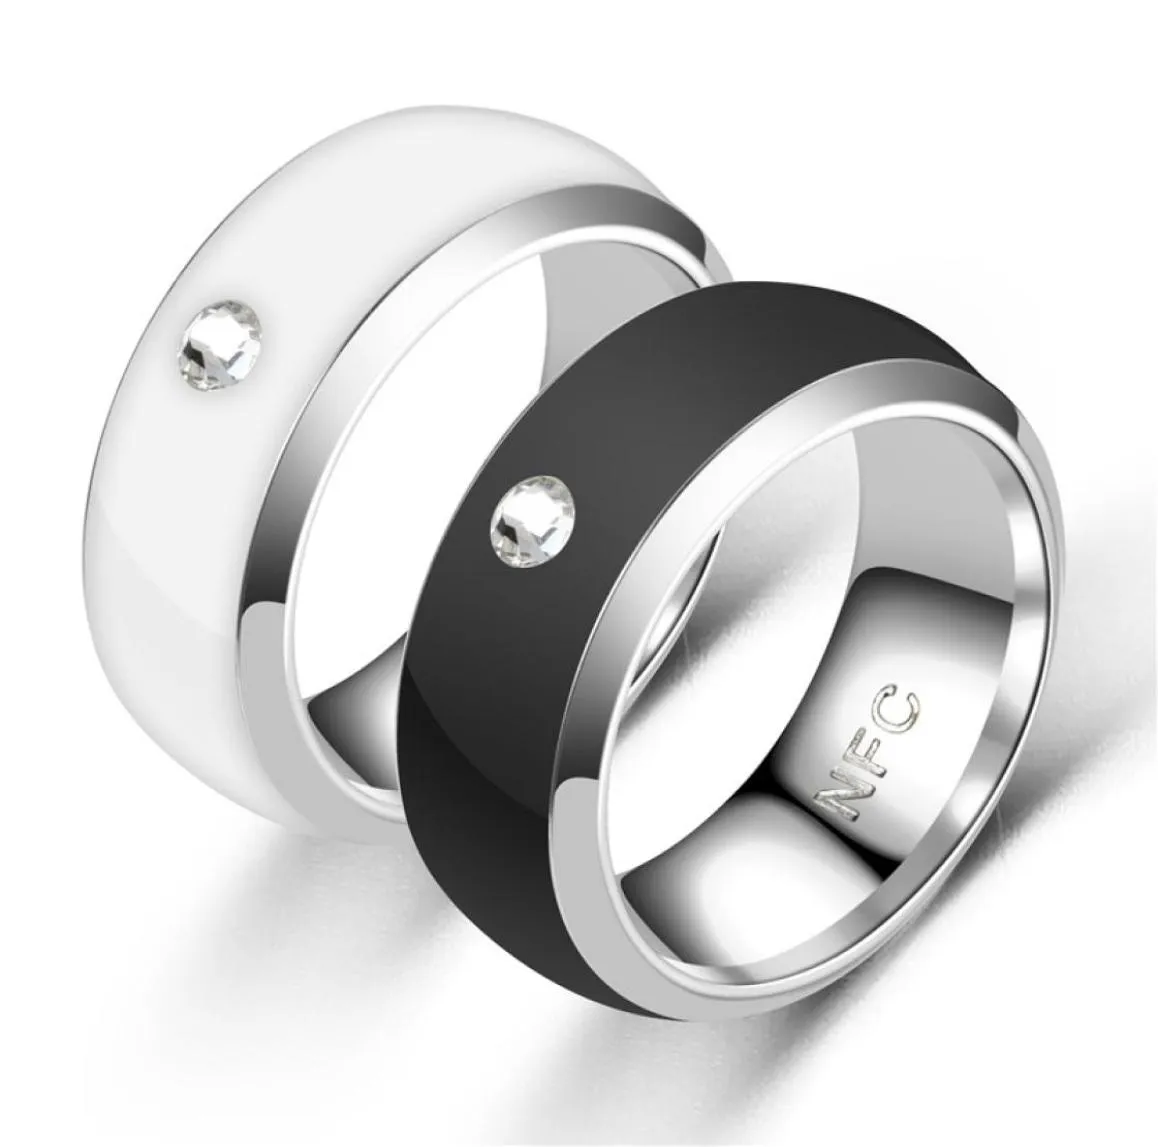 Men039s Ring New Technology NFC Smart Finger Digital Ring for Android Phones with Functional Couple Stainless Steel Rings8142589